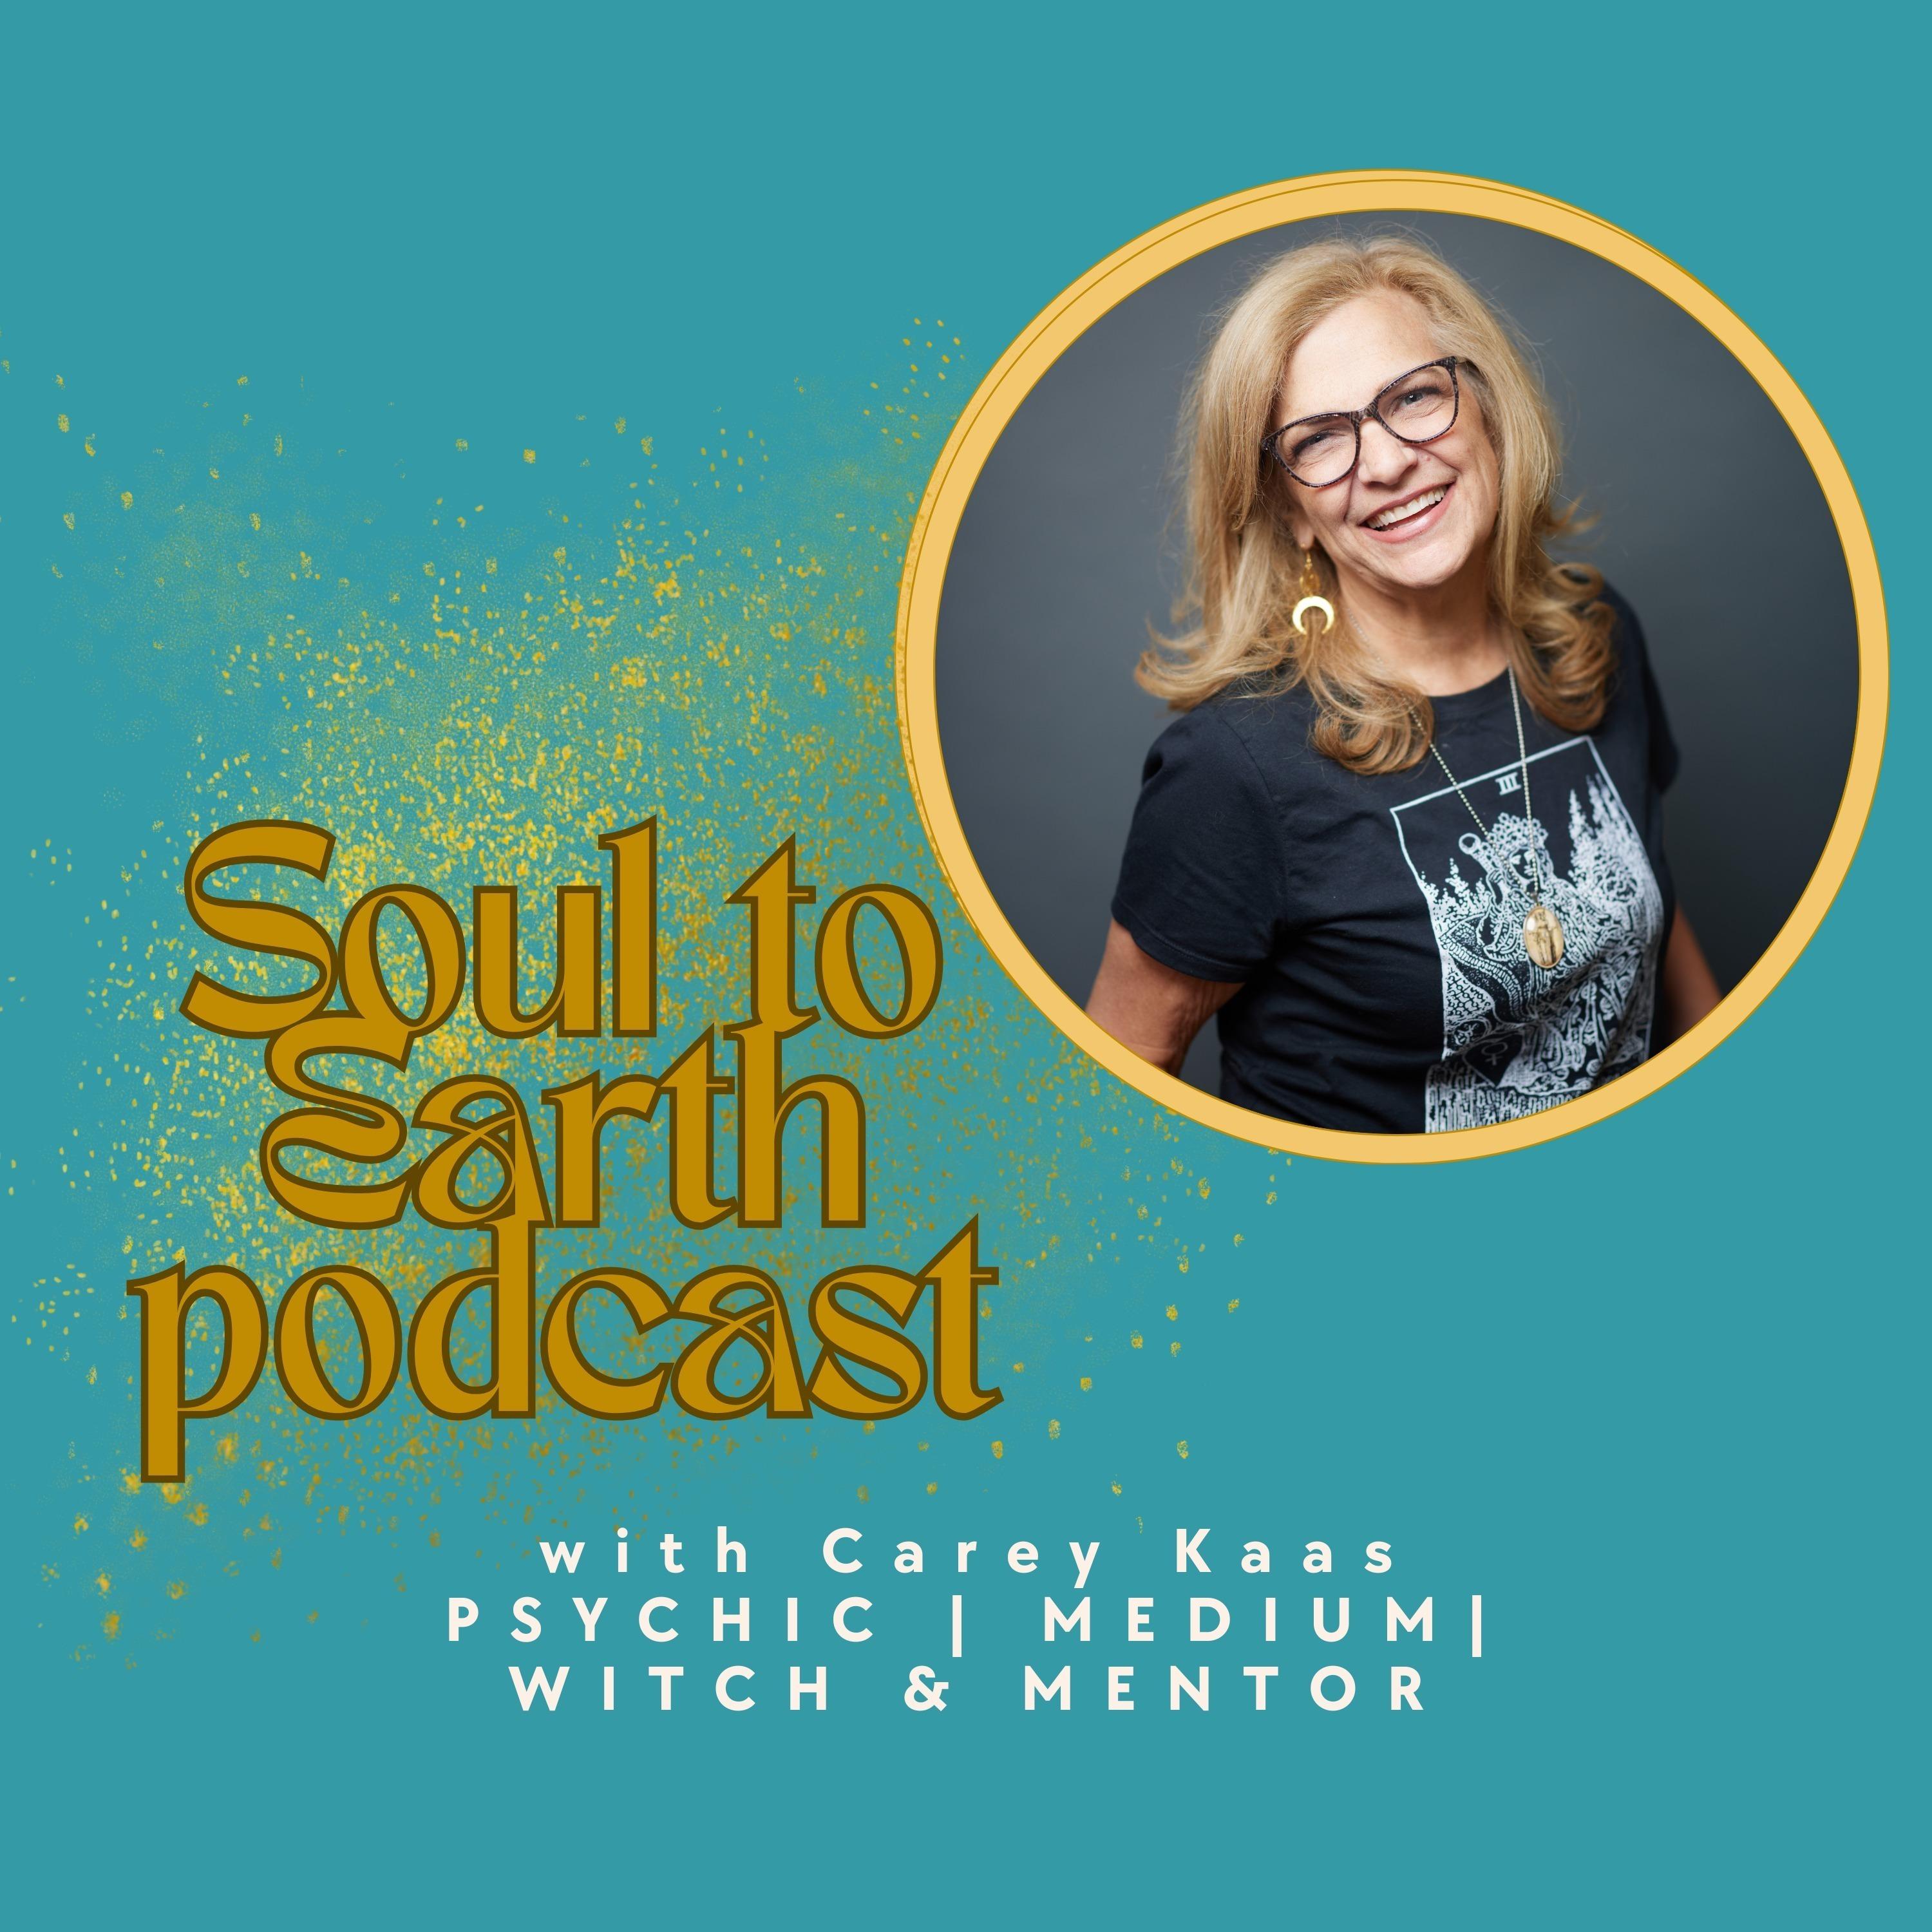 Soul to Earth podcast